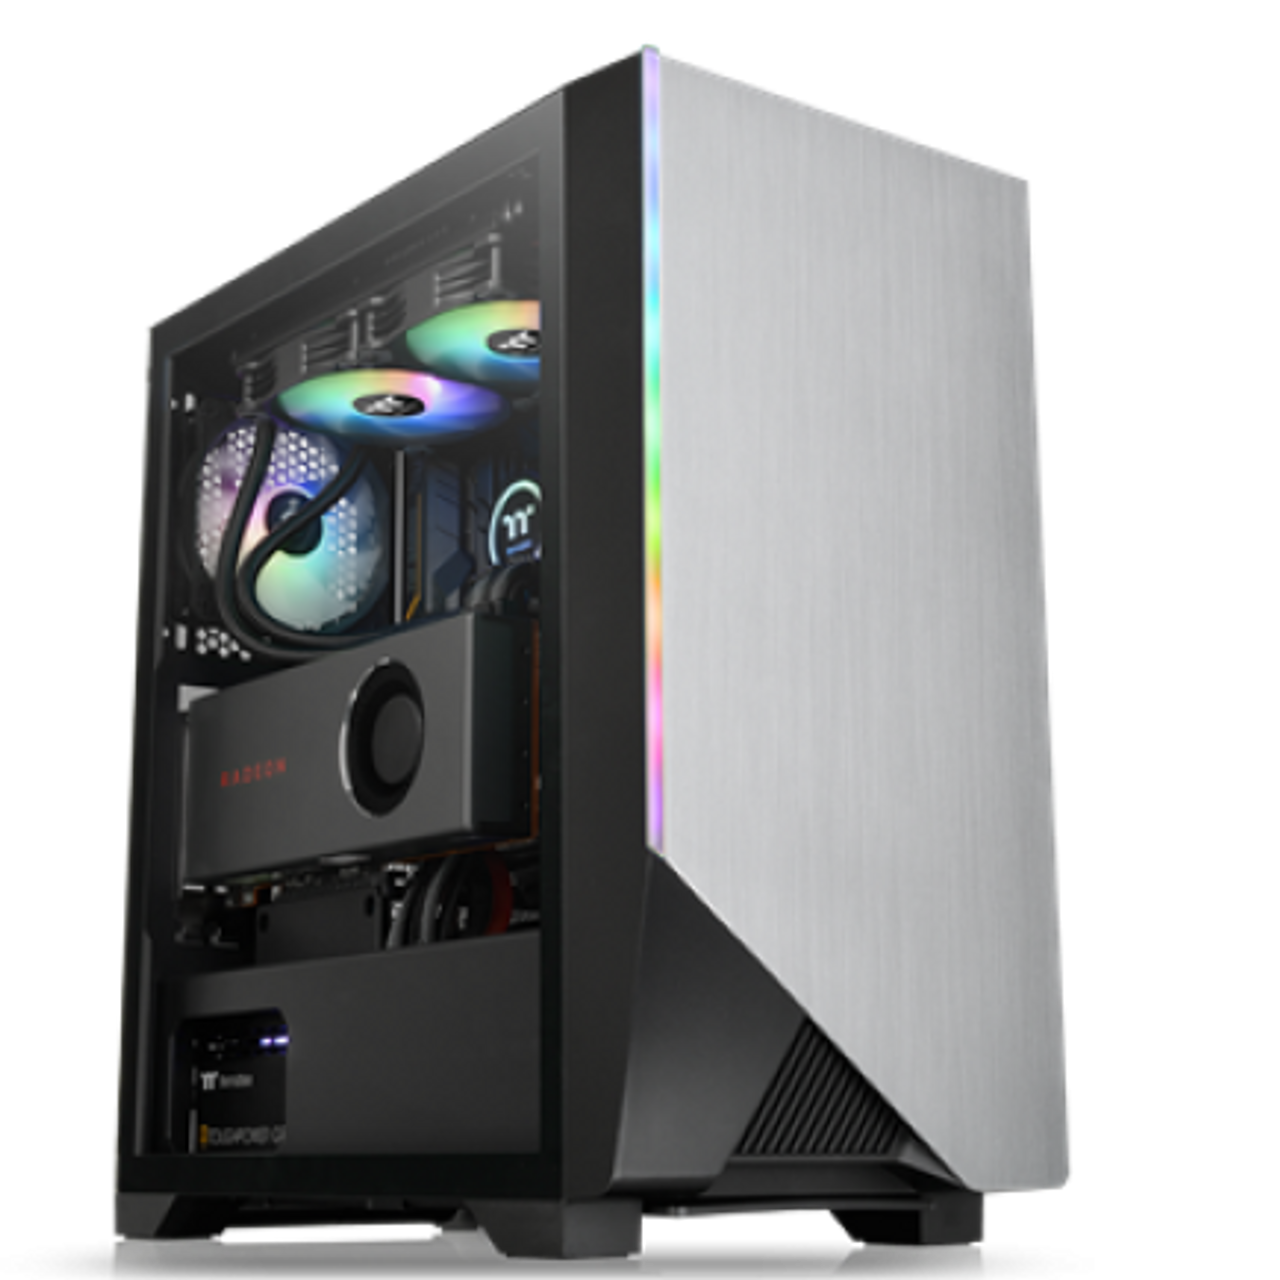 Thermaltake H550 ARGB Tempered Glass Mid Tower Case